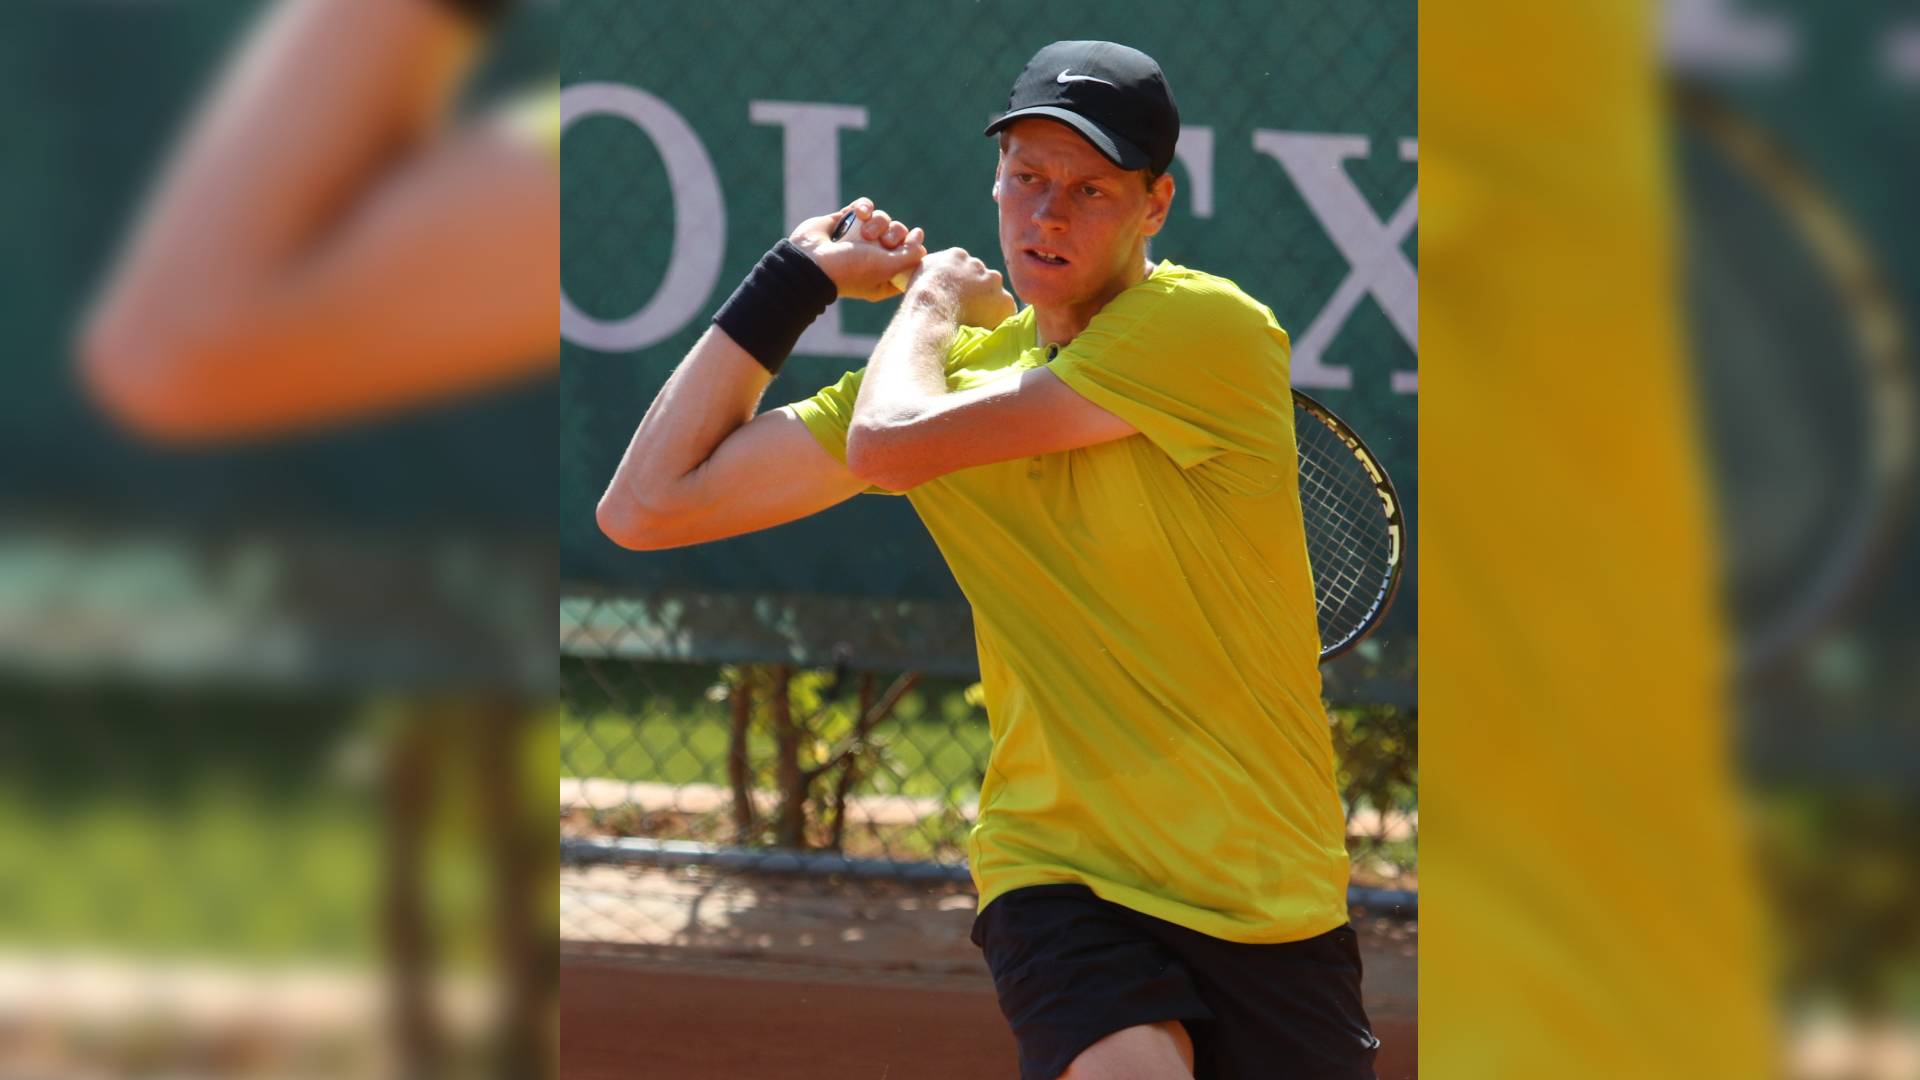 Tennis-Injured Sinner withdraws from Rome Masters